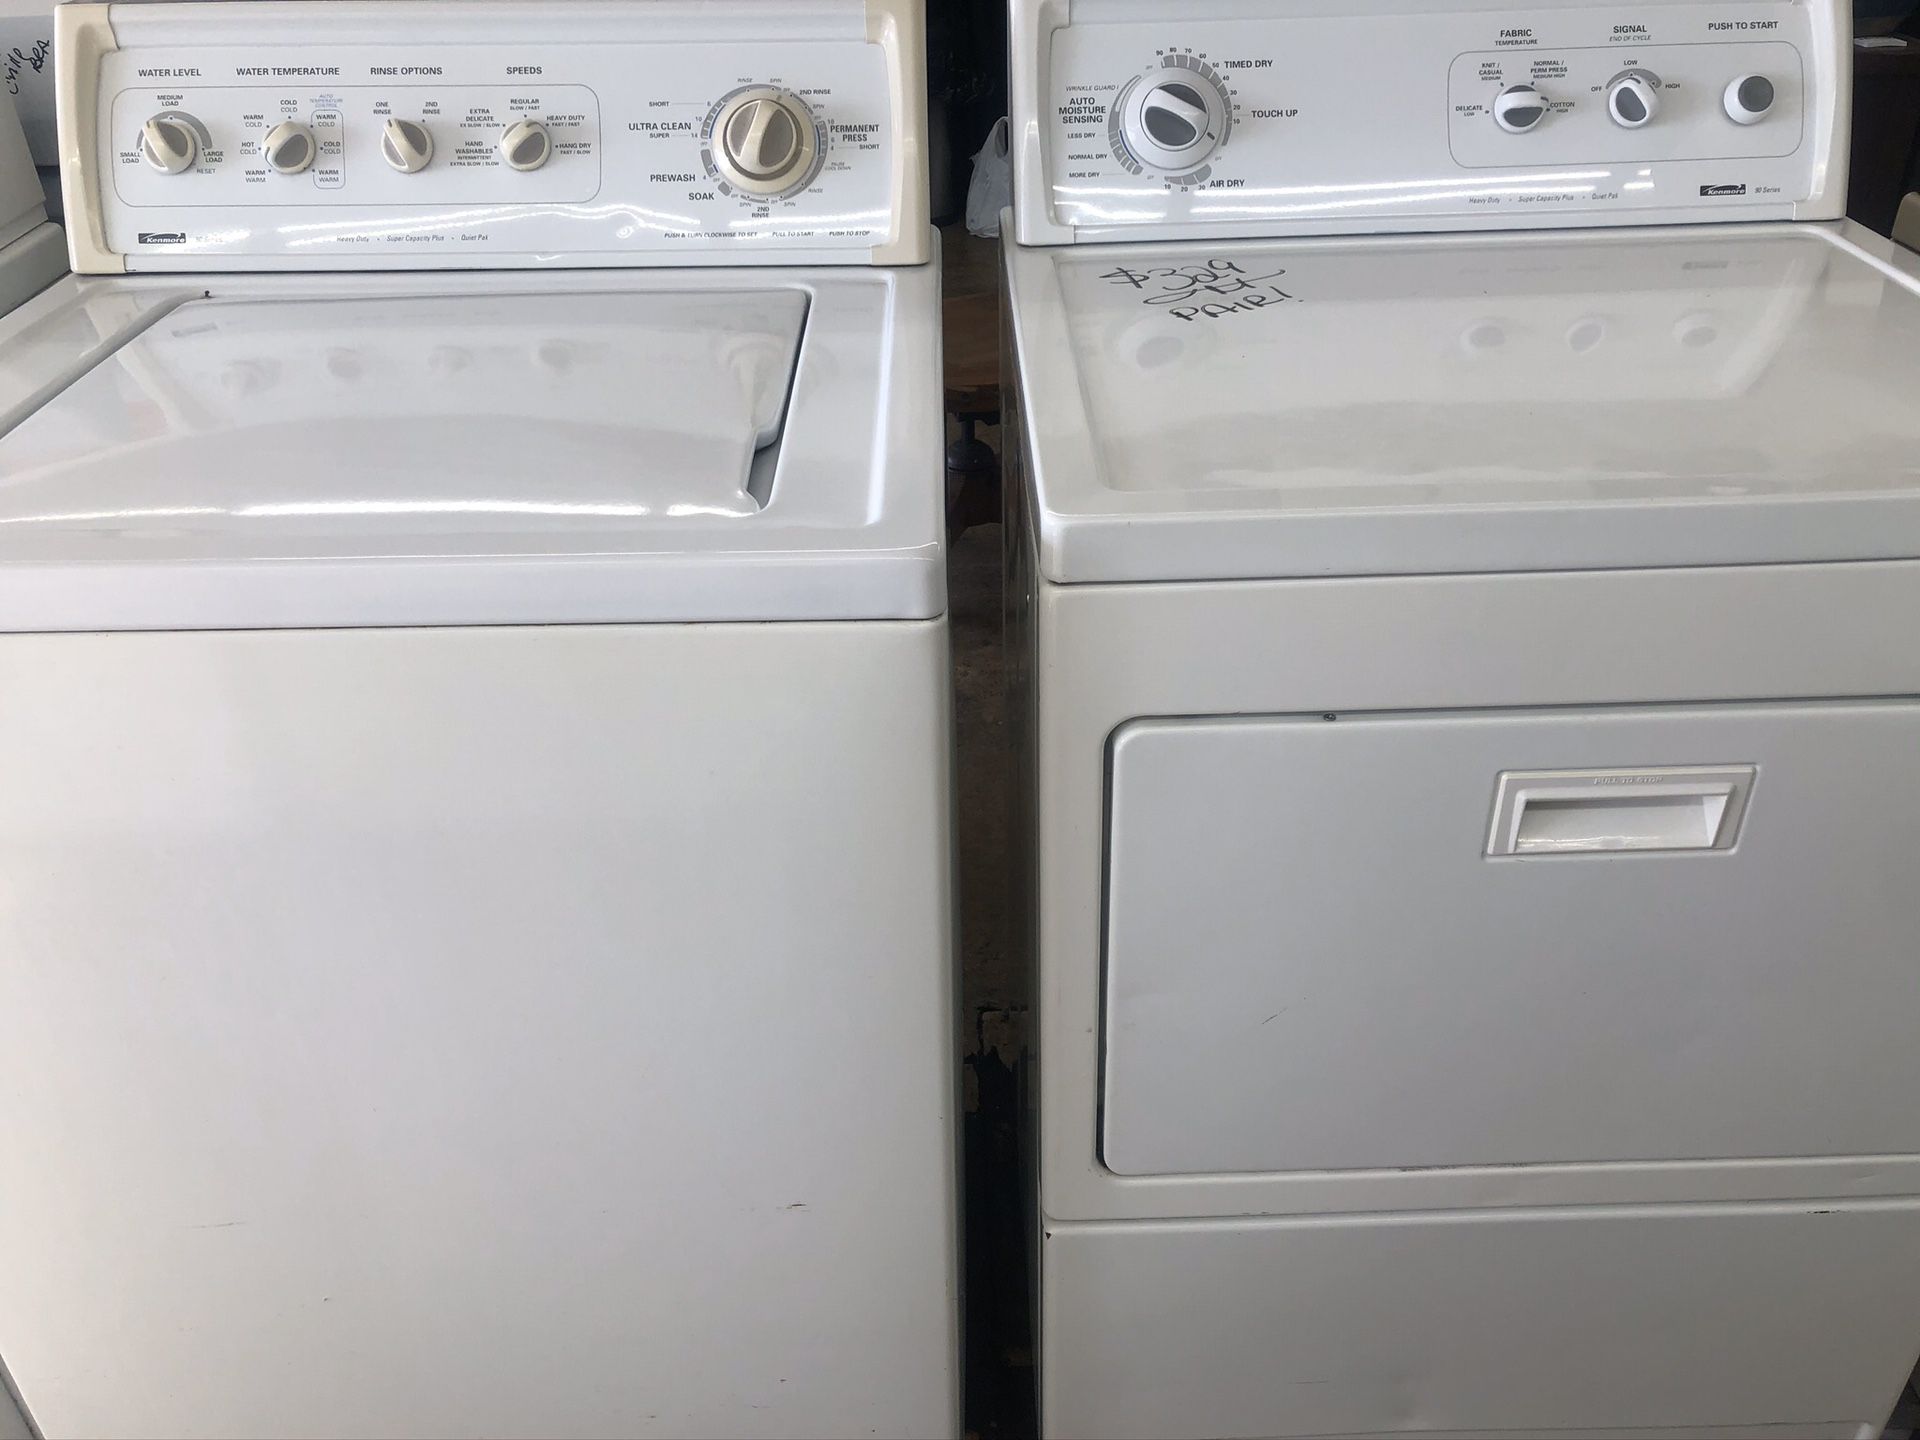 Beautiful 36 OPTIONS! Kenmore Washer Dryer Pair! 100% Guaranteed for 30 Days! Delivery $35 for Dayton!